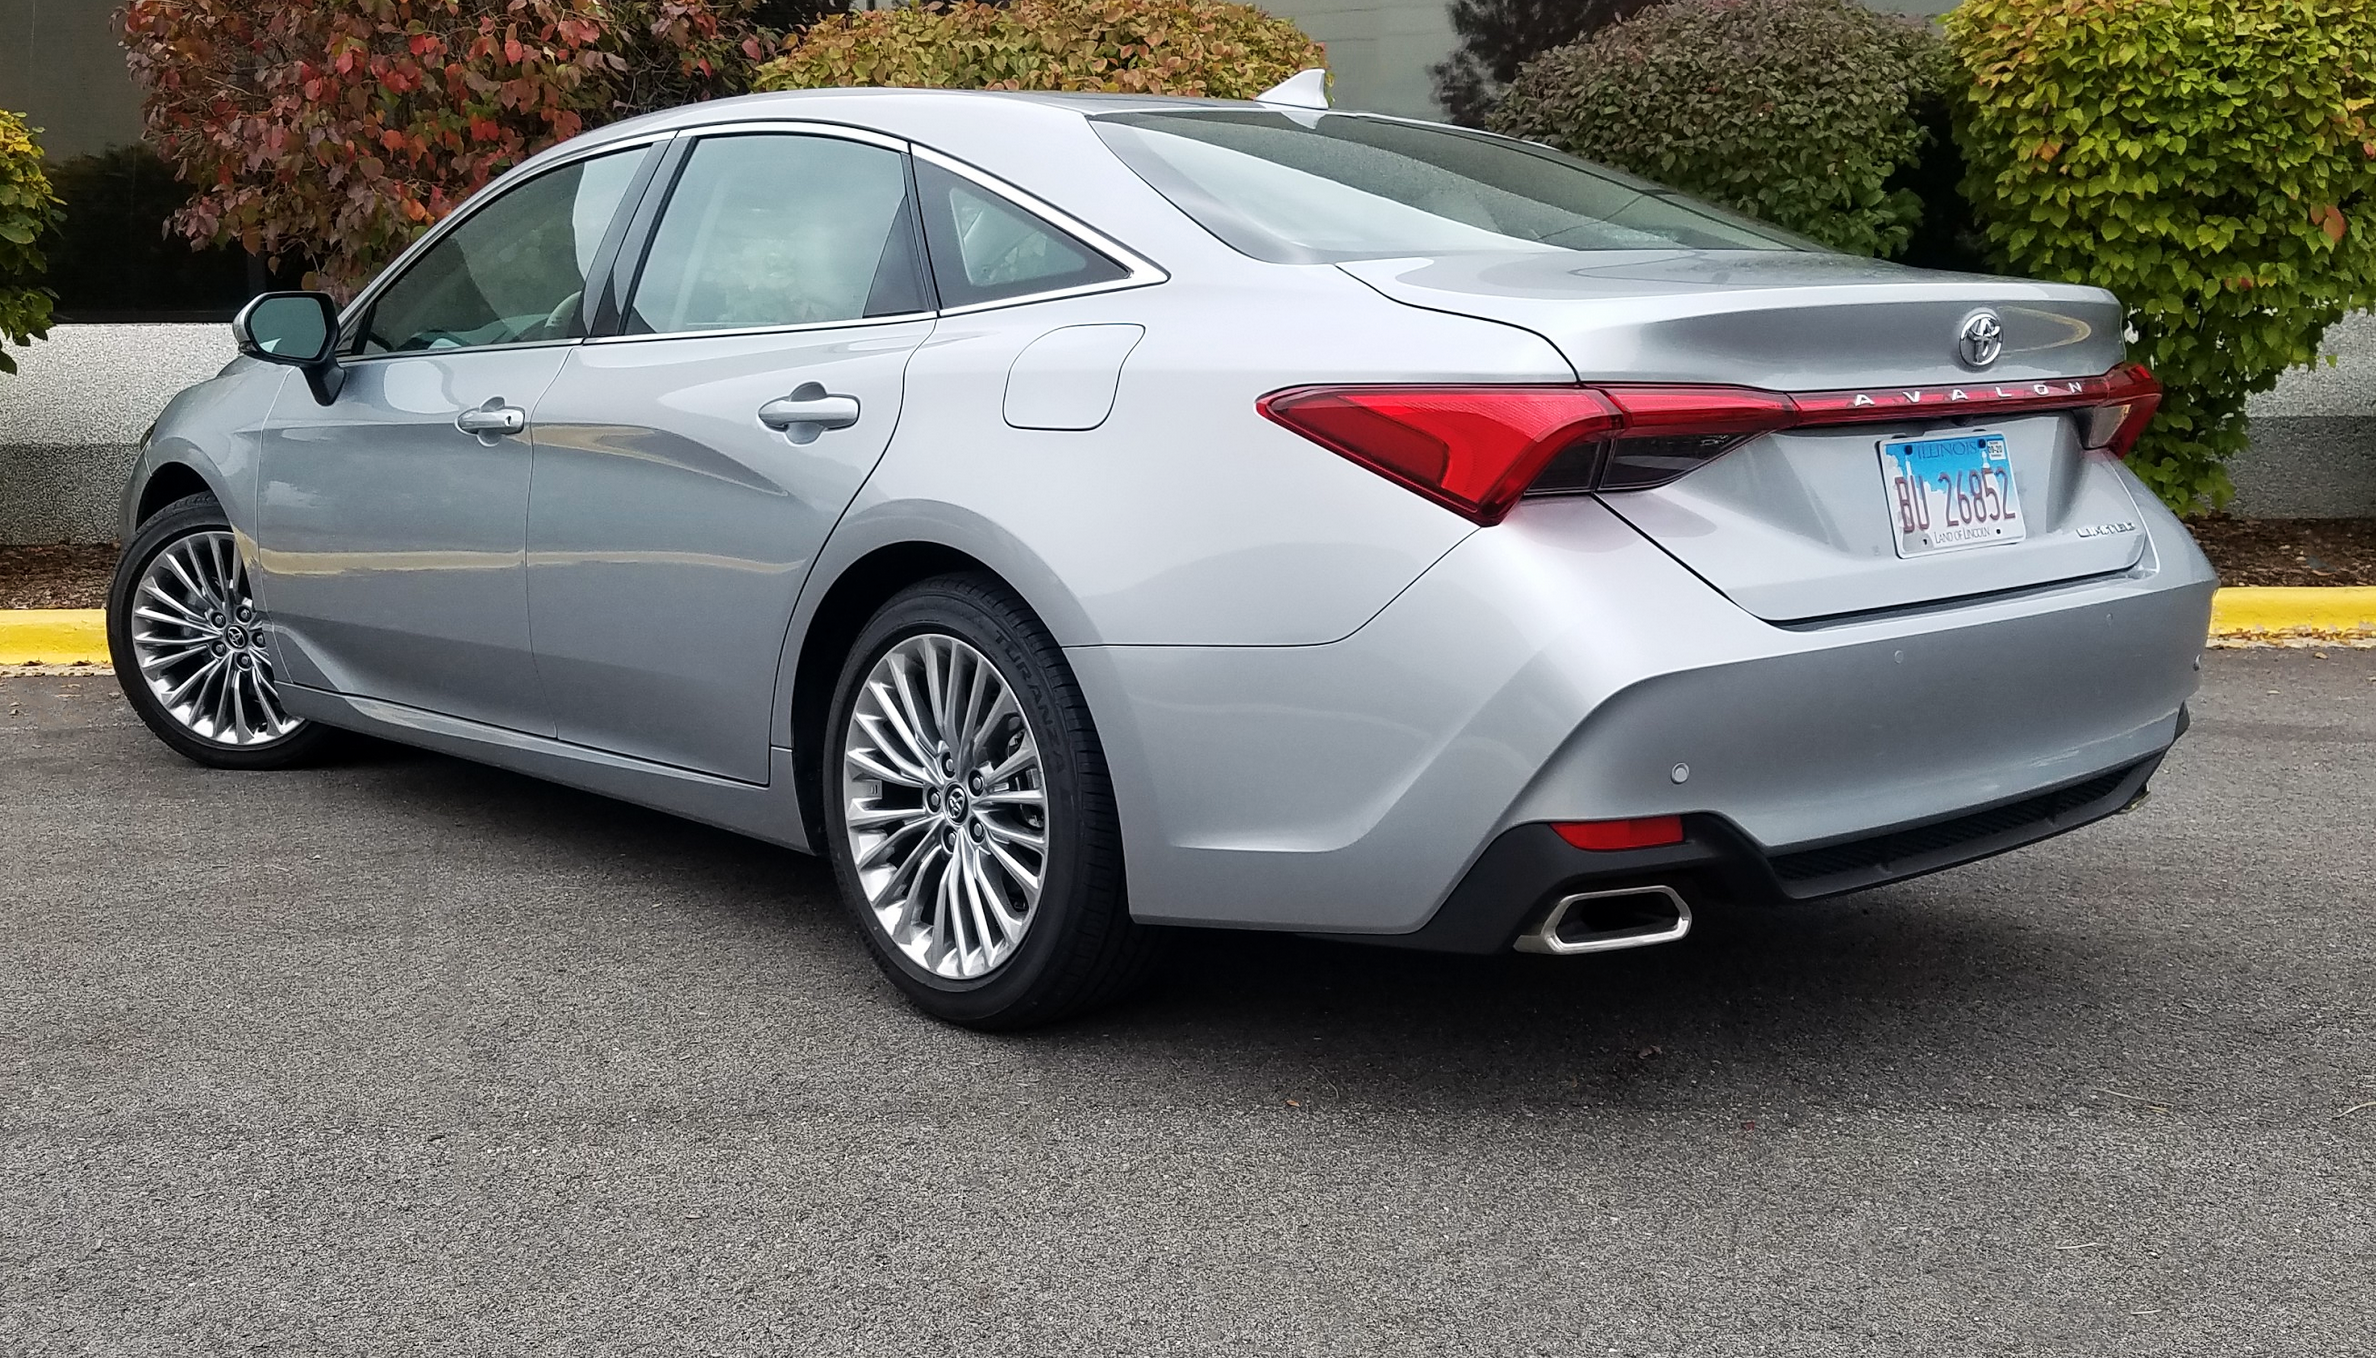 2020 Toyota Avalon Limited in Silver Metallic 